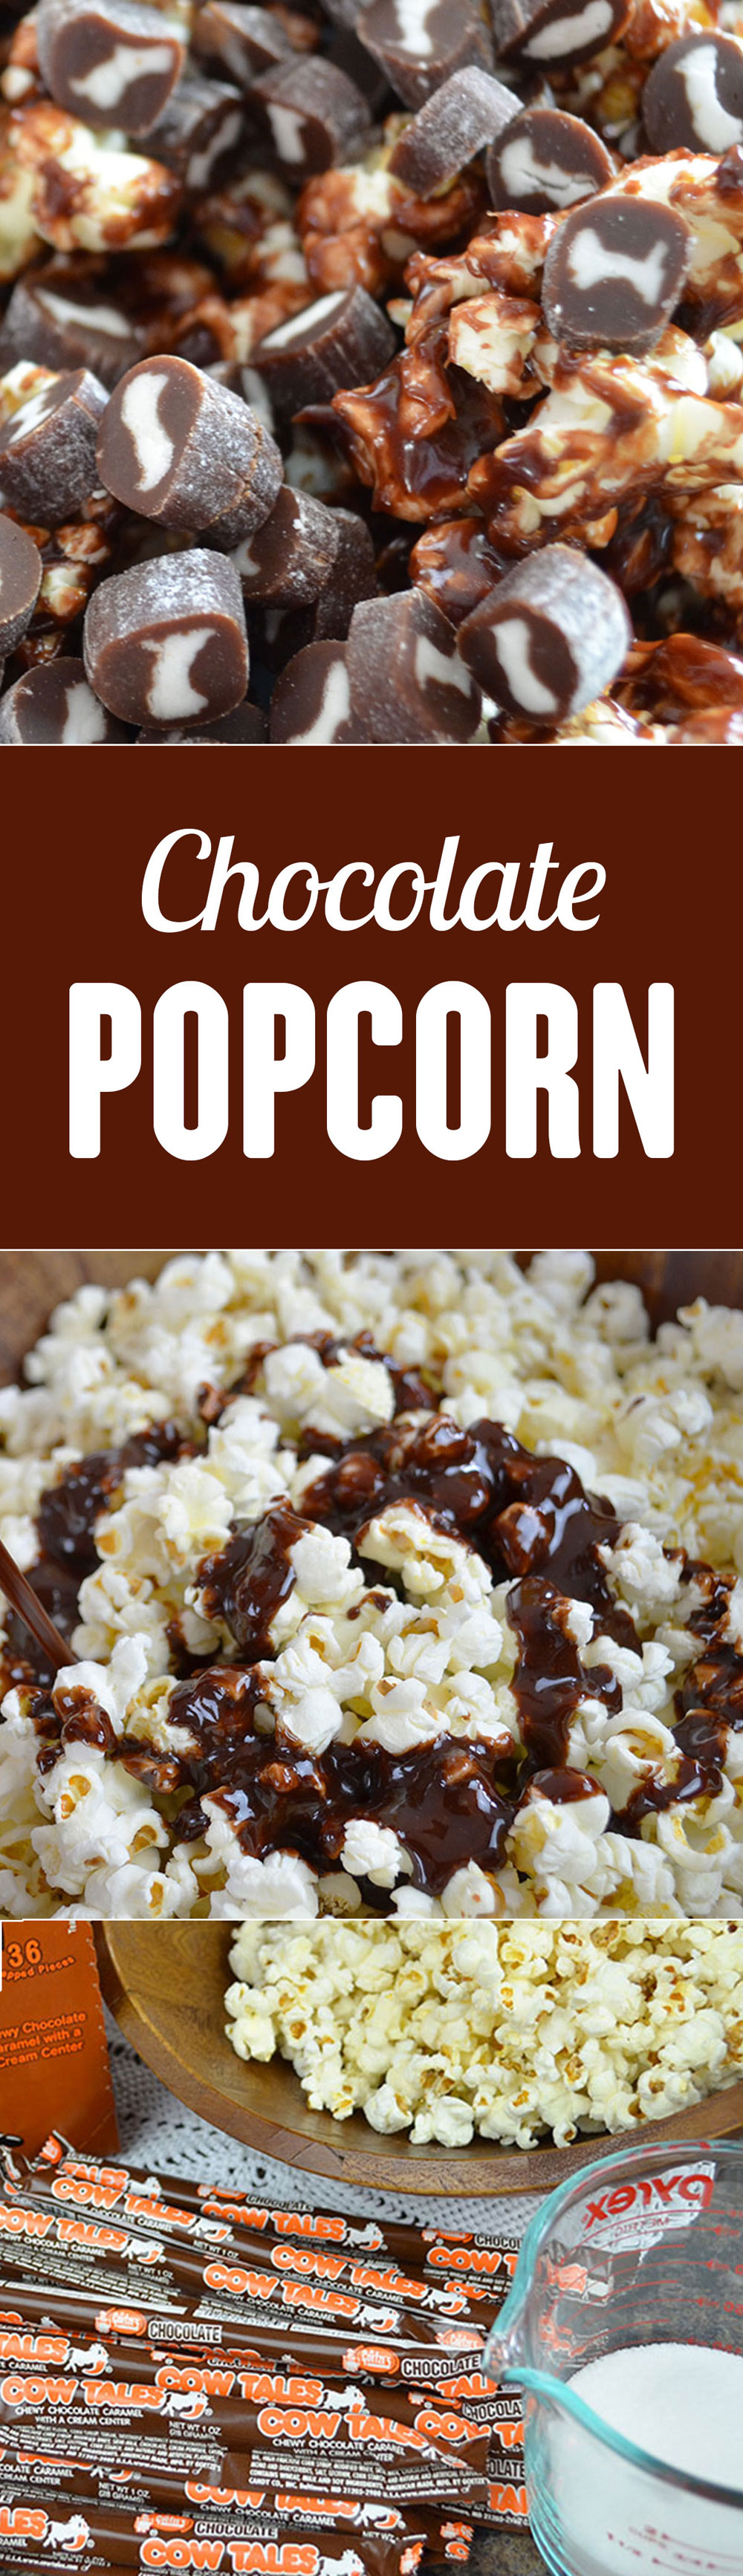 Sweet and salty! This is the best chocolate popcorn recipe I've tried so far! It's super easy and delicious. Save this snack recipe for movie night or a snow day. Chocolate Cow Tales® Popcorn Recipe.